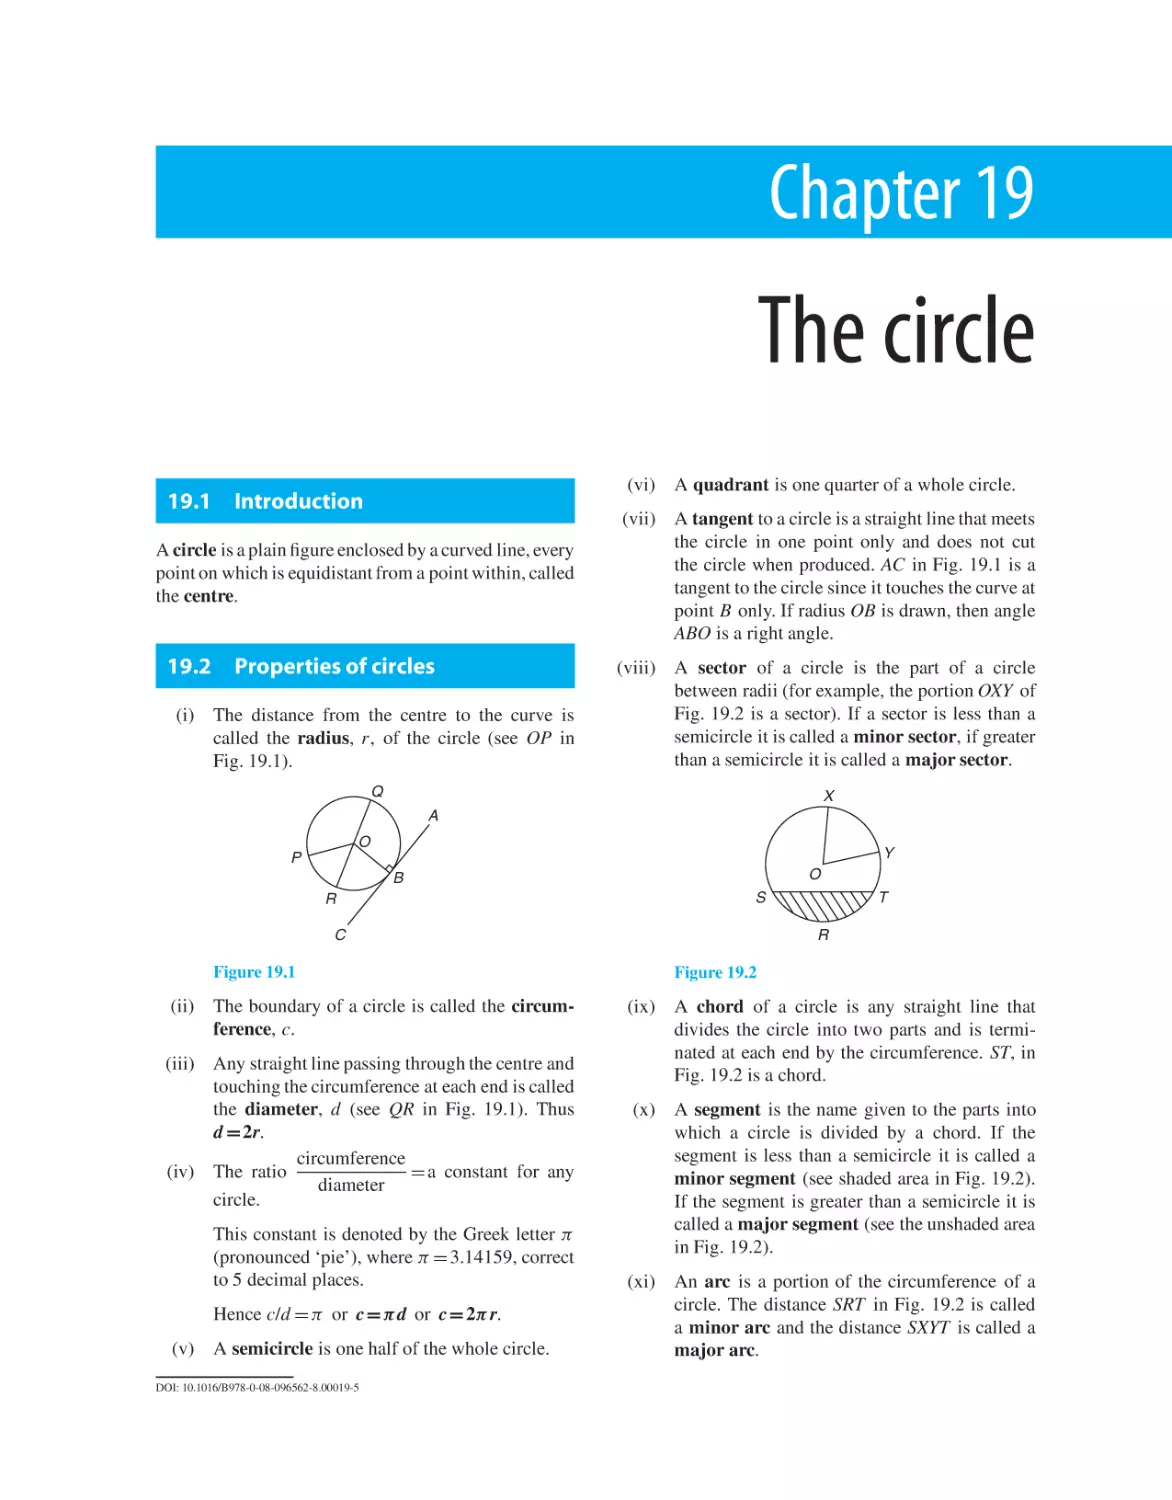 Chapter 19. The circle
19.1 Introduction
19.2 Properties of circles